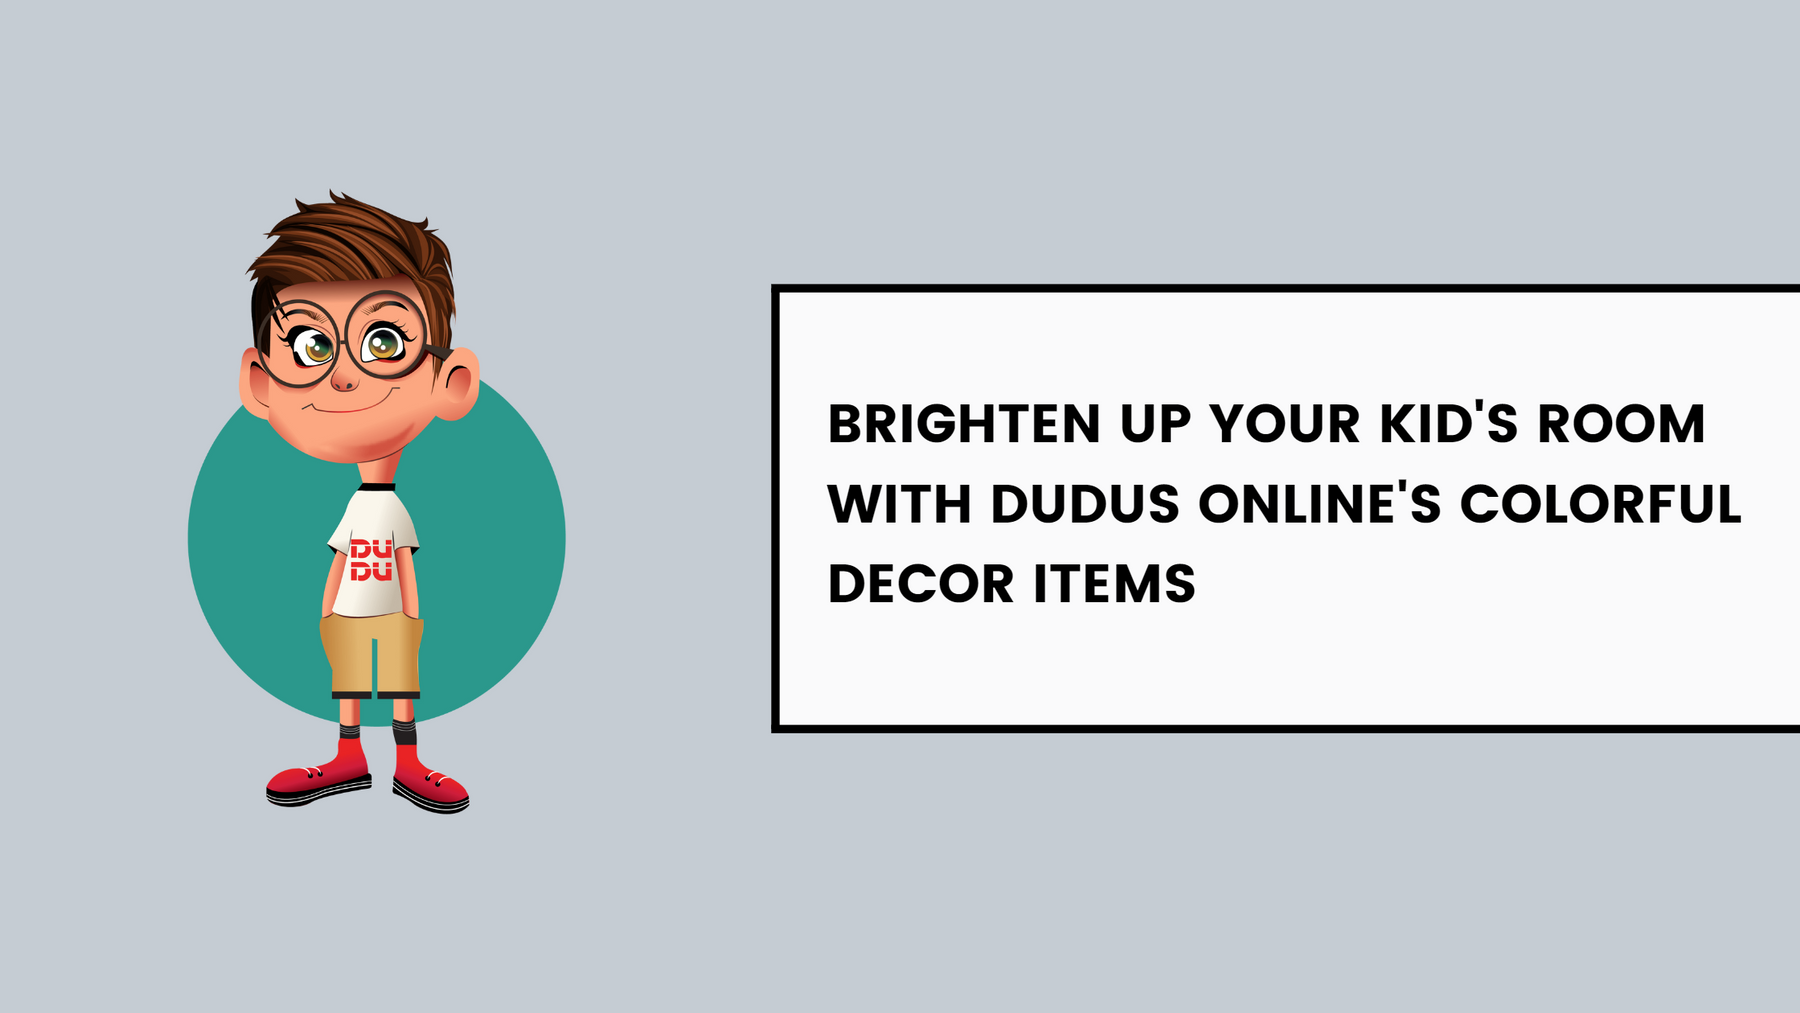 Brighten Up Your Kid's Room with Dudus Online's Colorful Decor Items